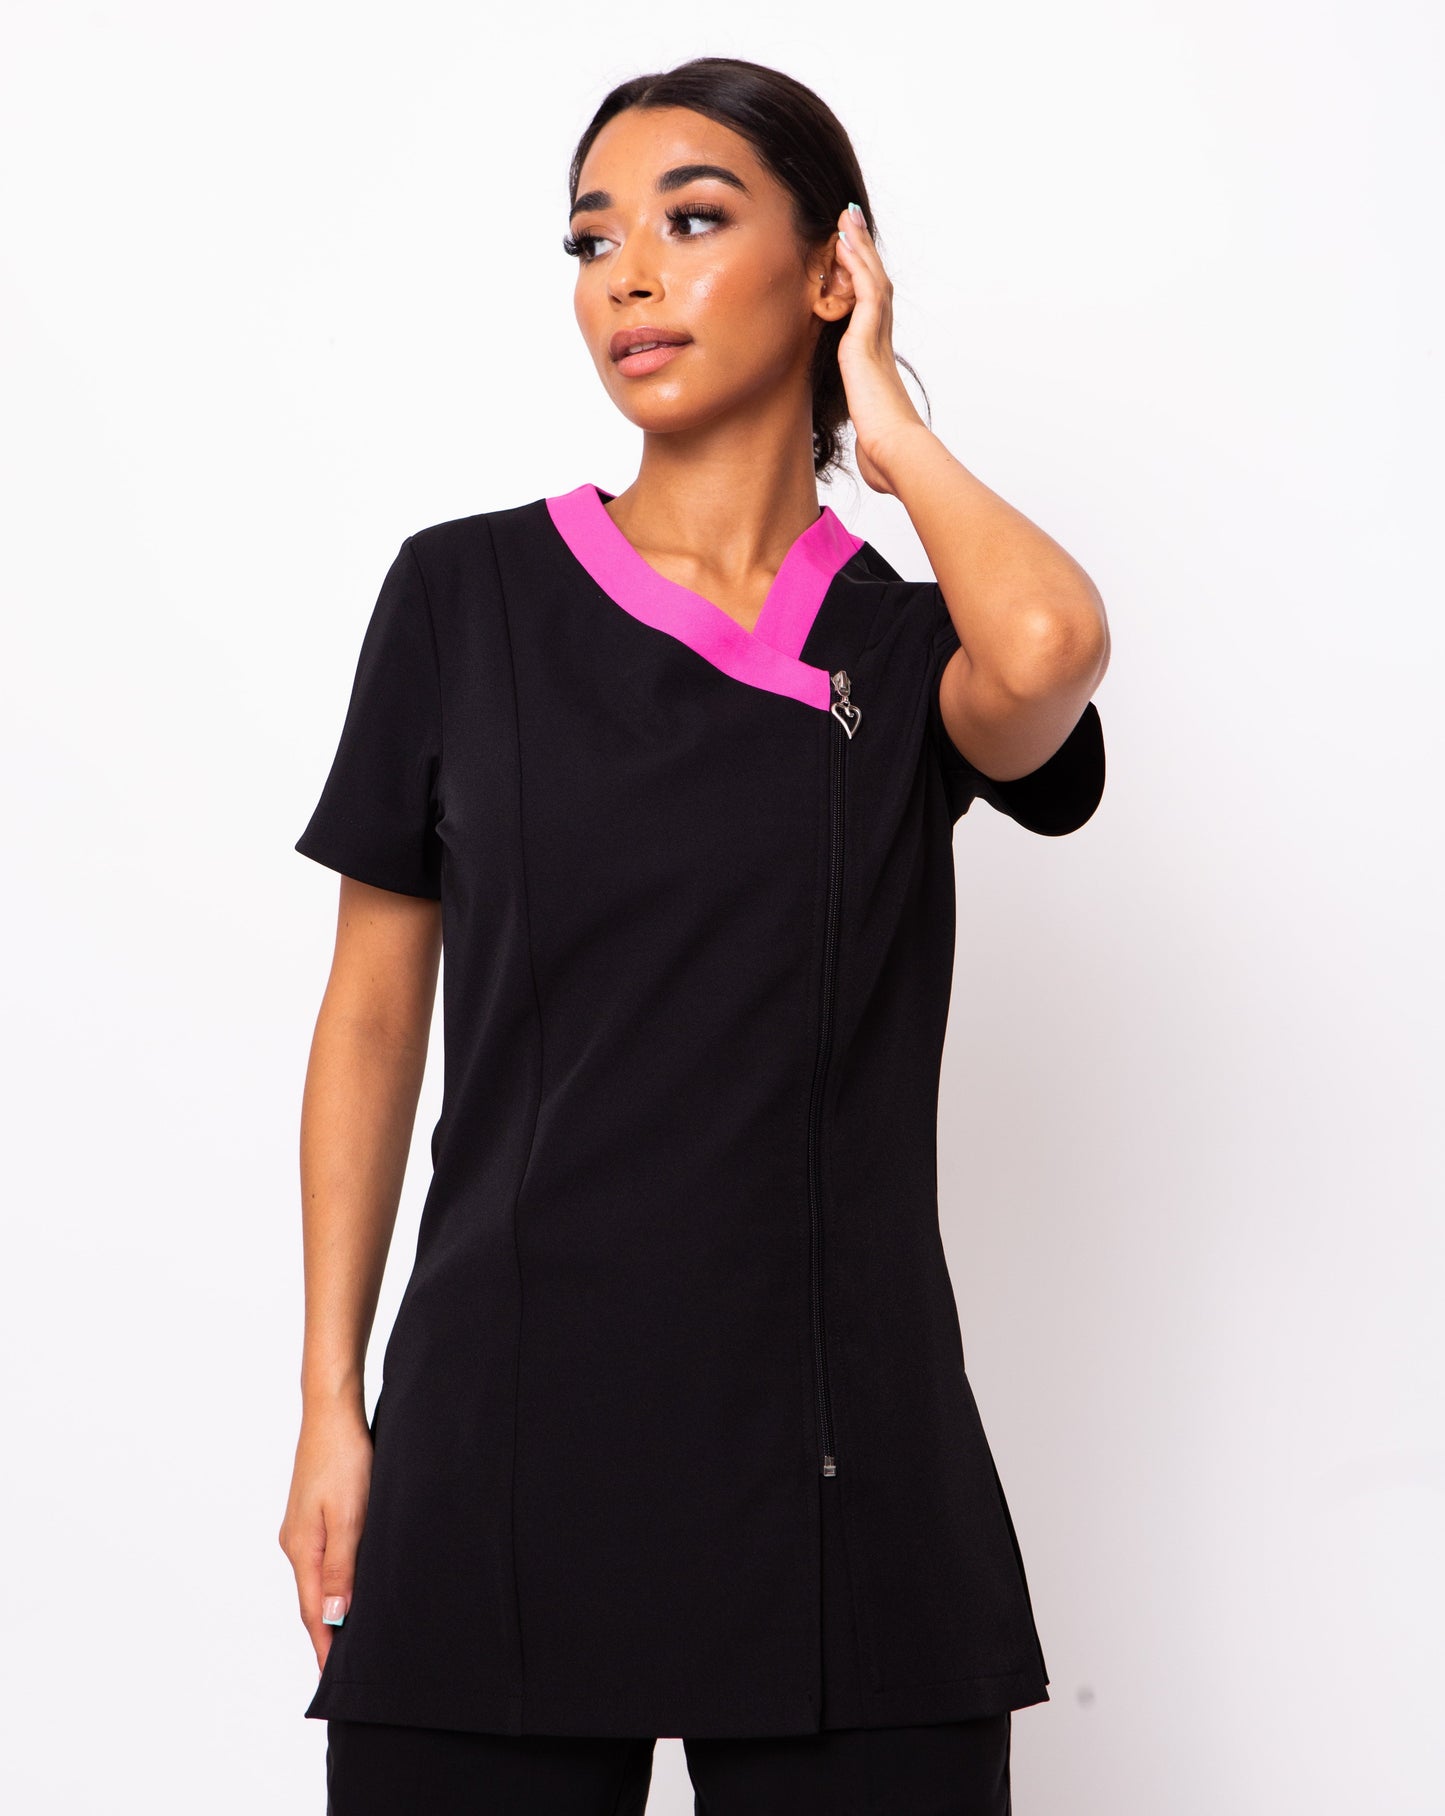 Black beauty tunic with hot pink trim